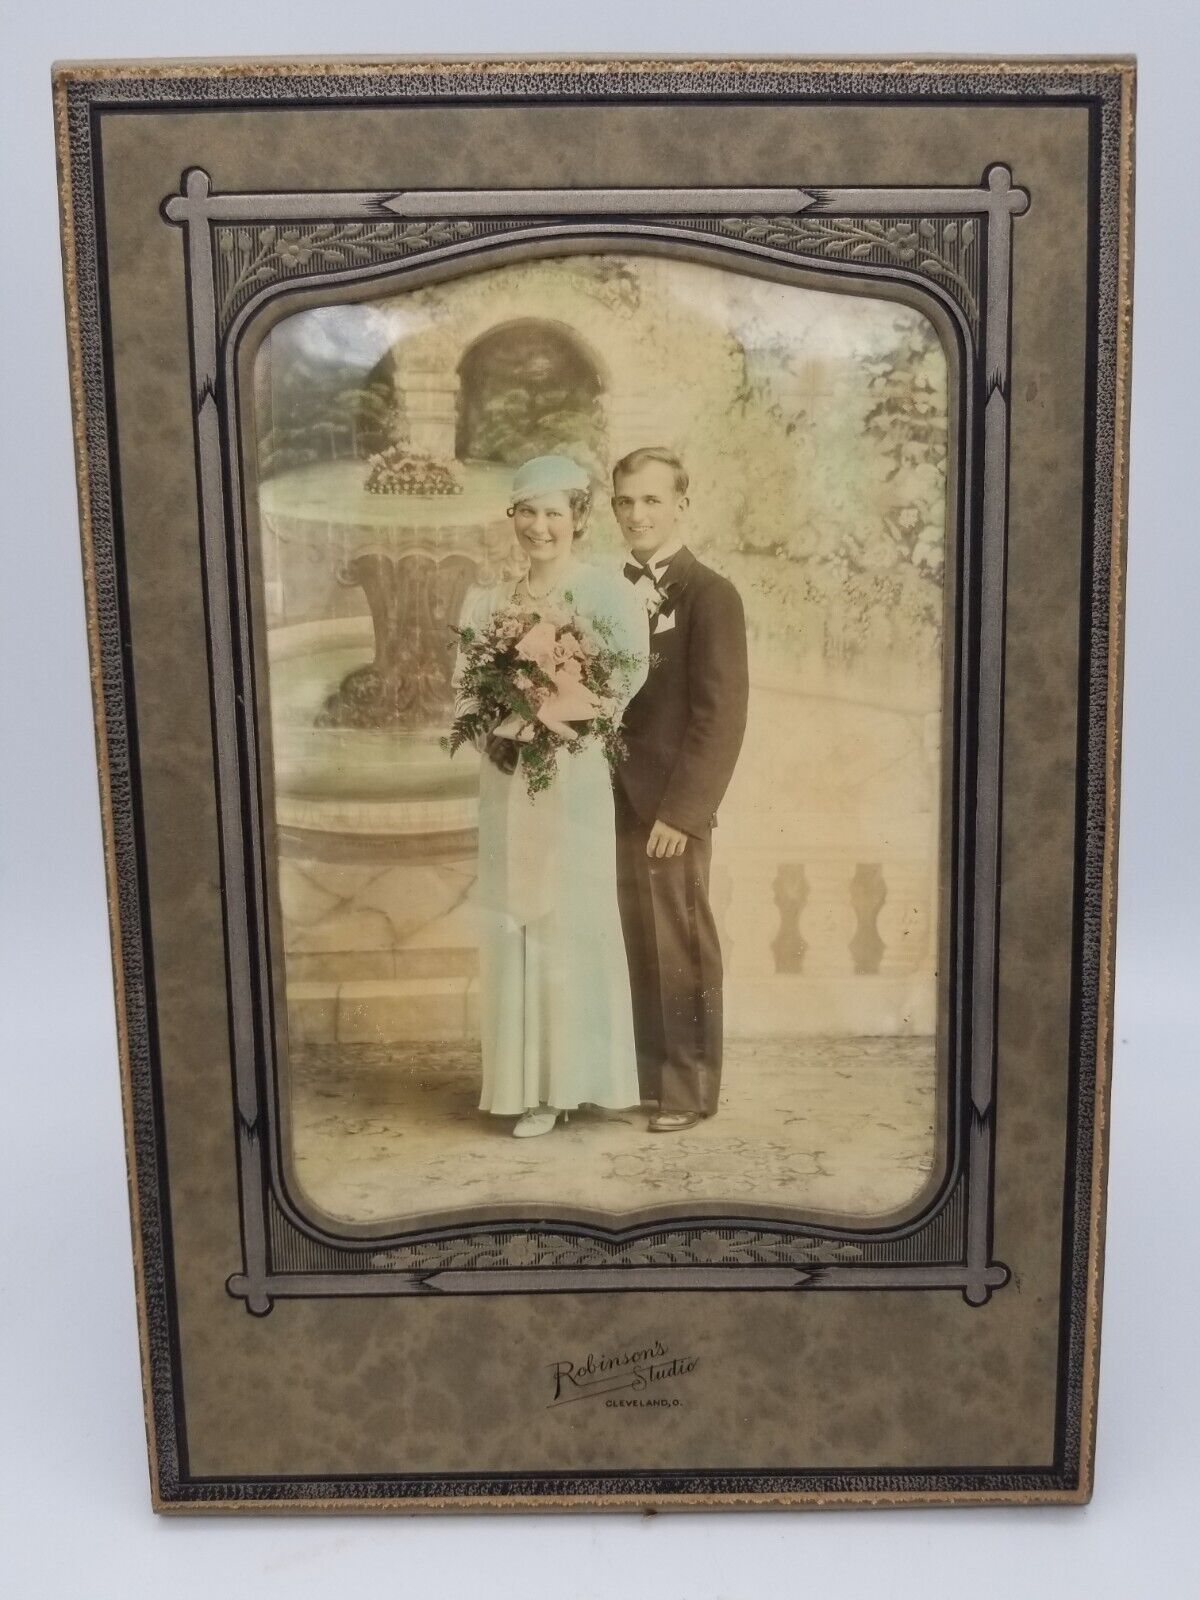 Couple Engagement Wedding Formal Romantic Black & White Photo Hand Colored